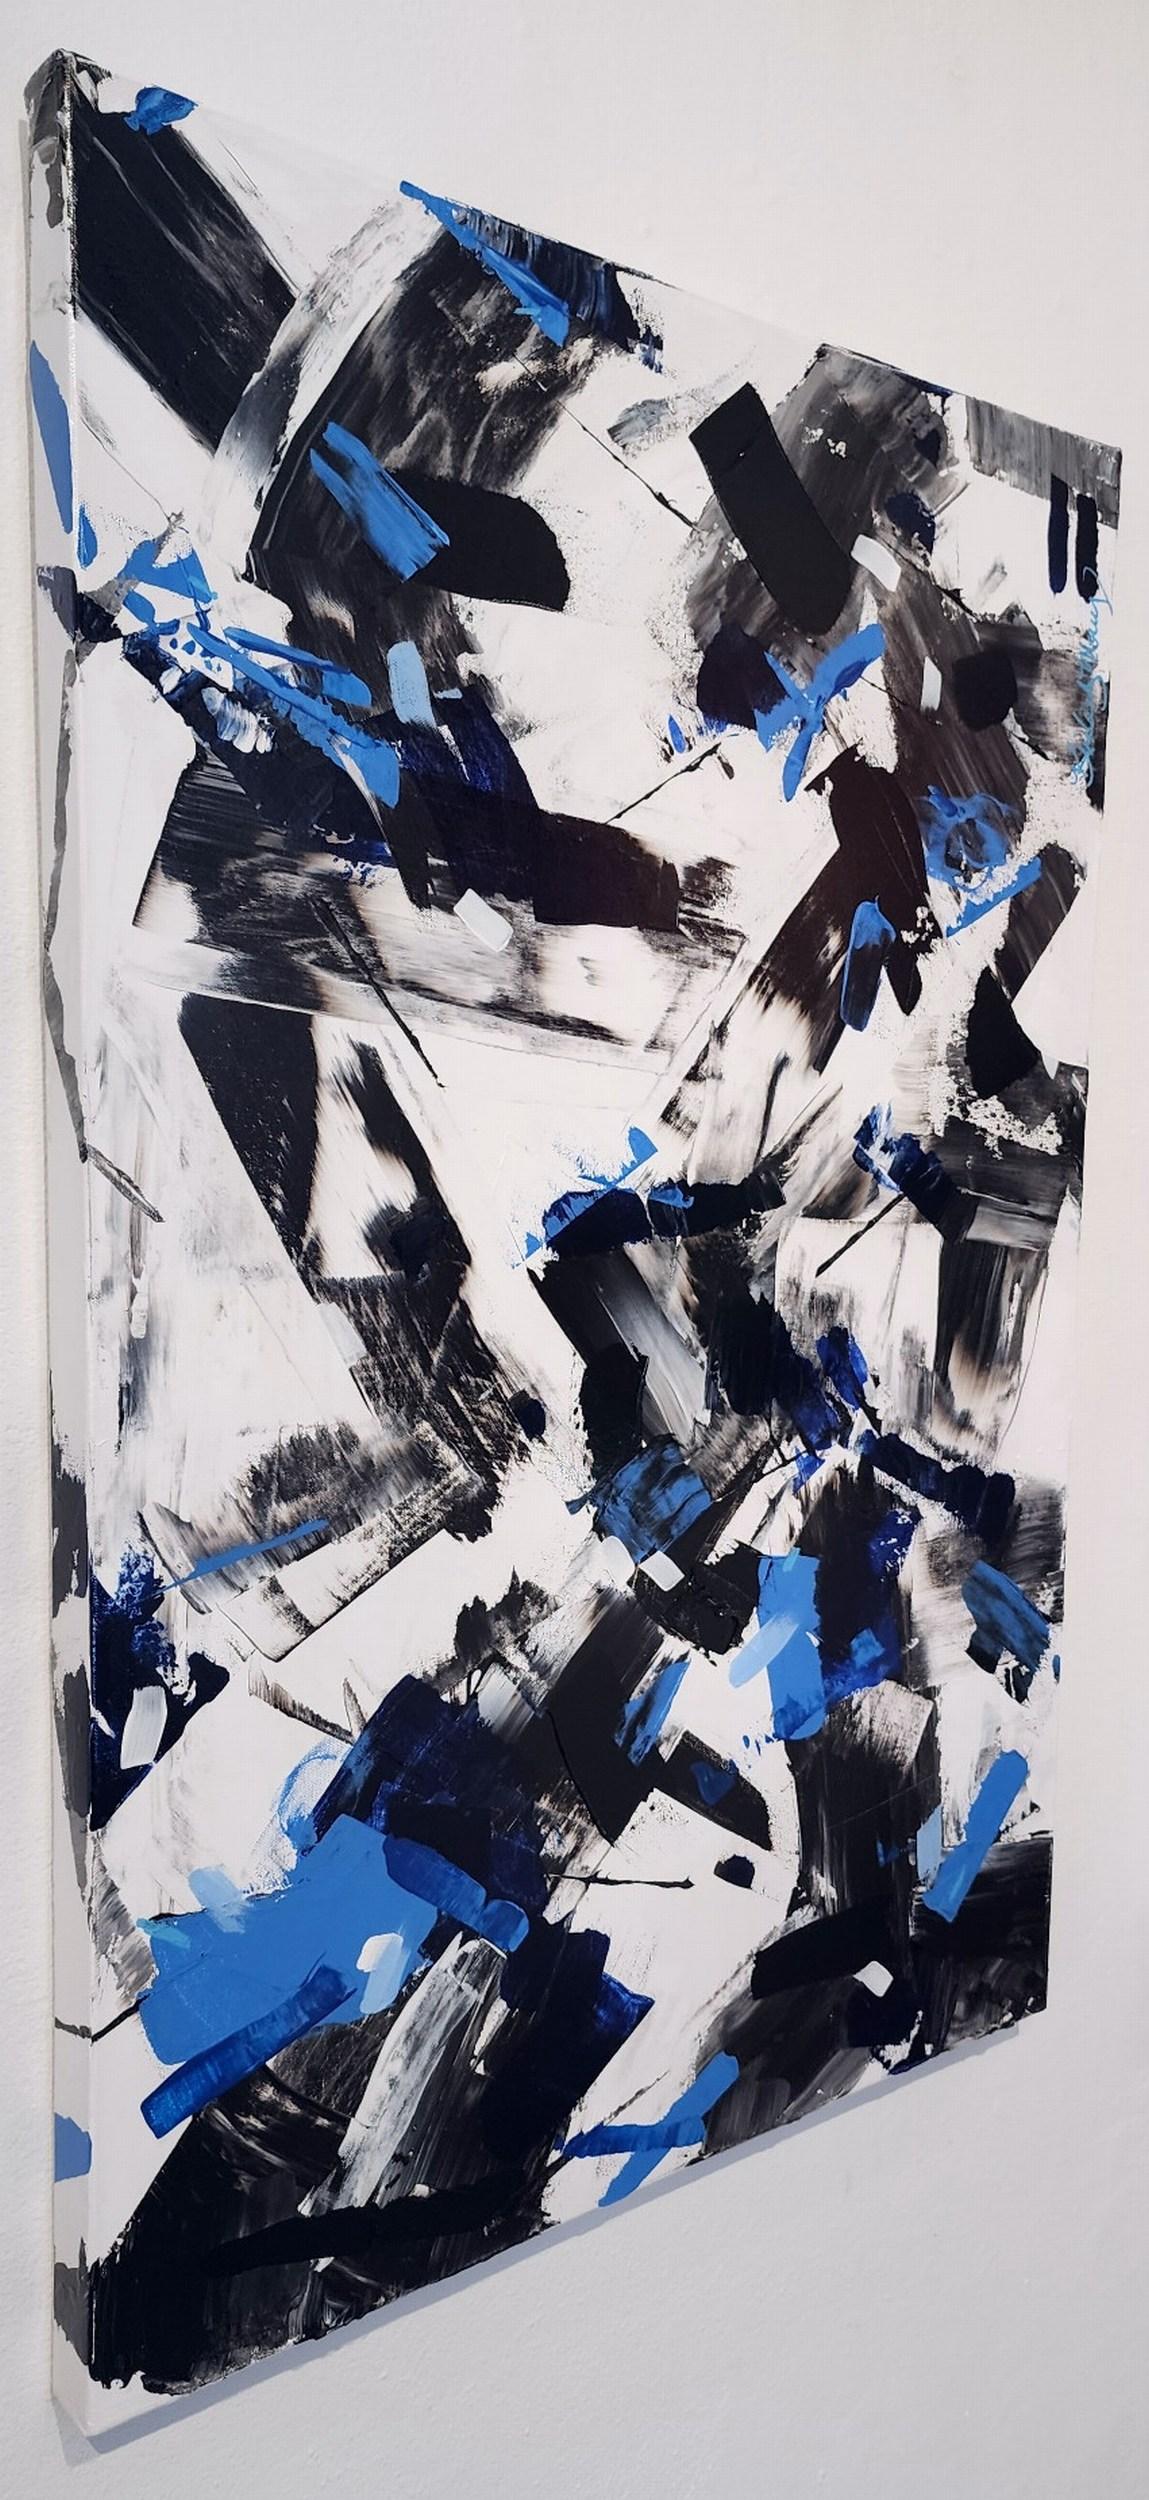 Kimberly Marney
Untitled
2024
Acrylic on Canvas
Size: 36x24x1.5in
Signed by hand
COA provided

Tags: Abstract, Black, White, Blue, Gestural

----------

Growing up in the country embedded a deep love for the beauty of the natural world. The small